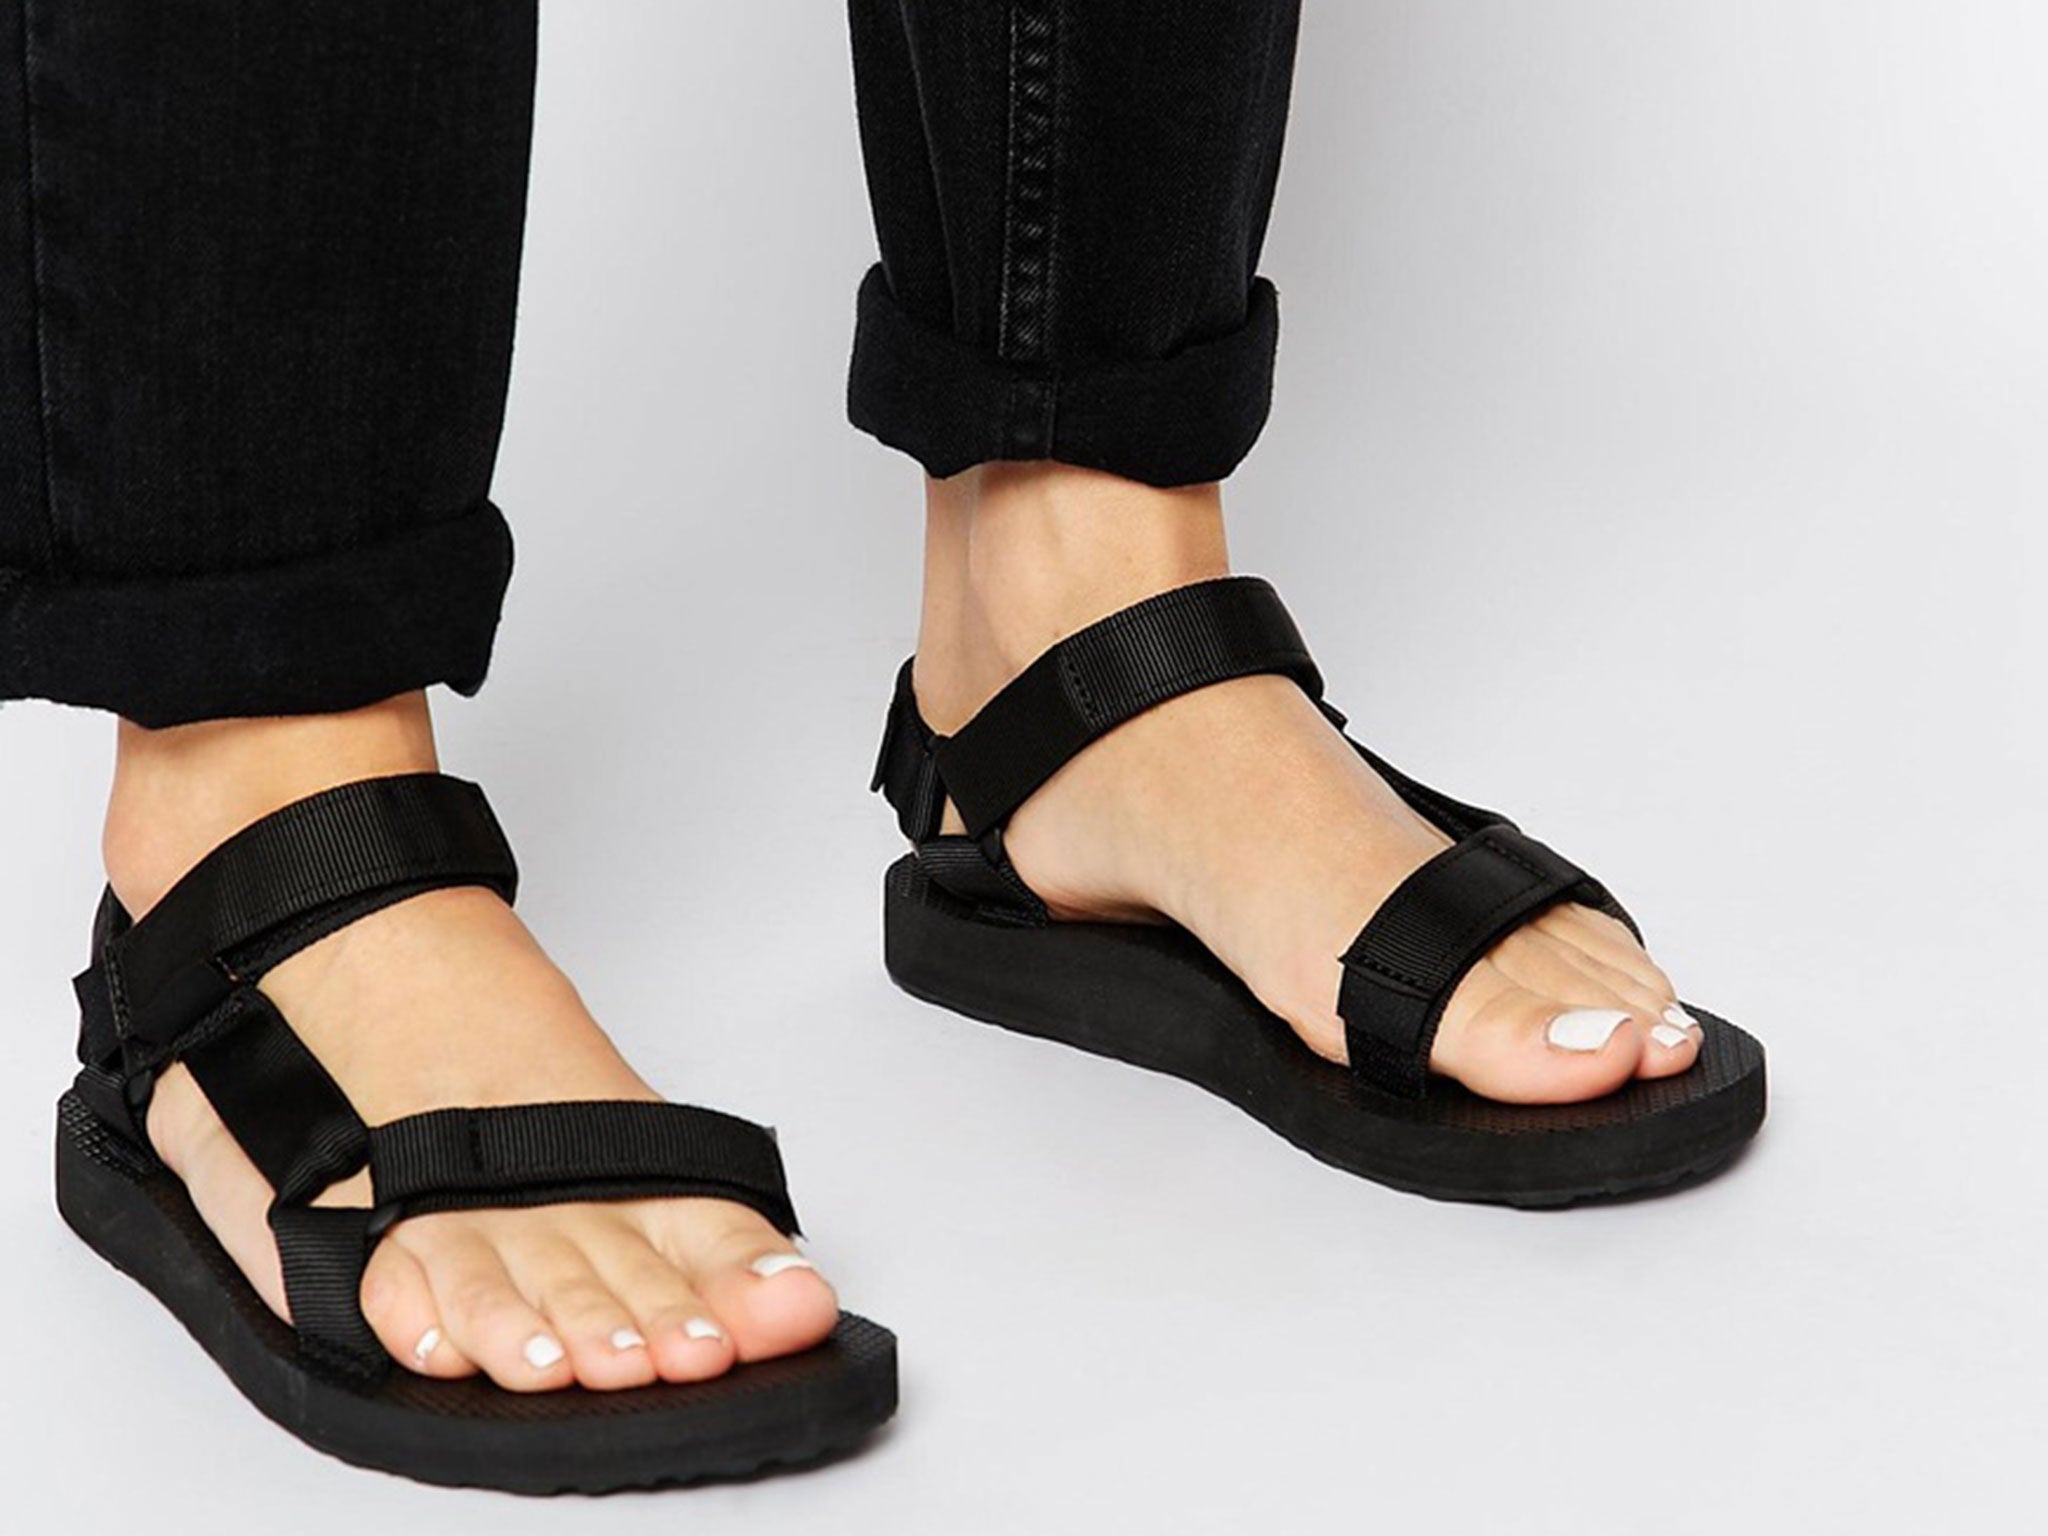 Like Birkenstocks, the simple sport sandal once considered the ultimate faux pas, is trying to make a comeback for summer.